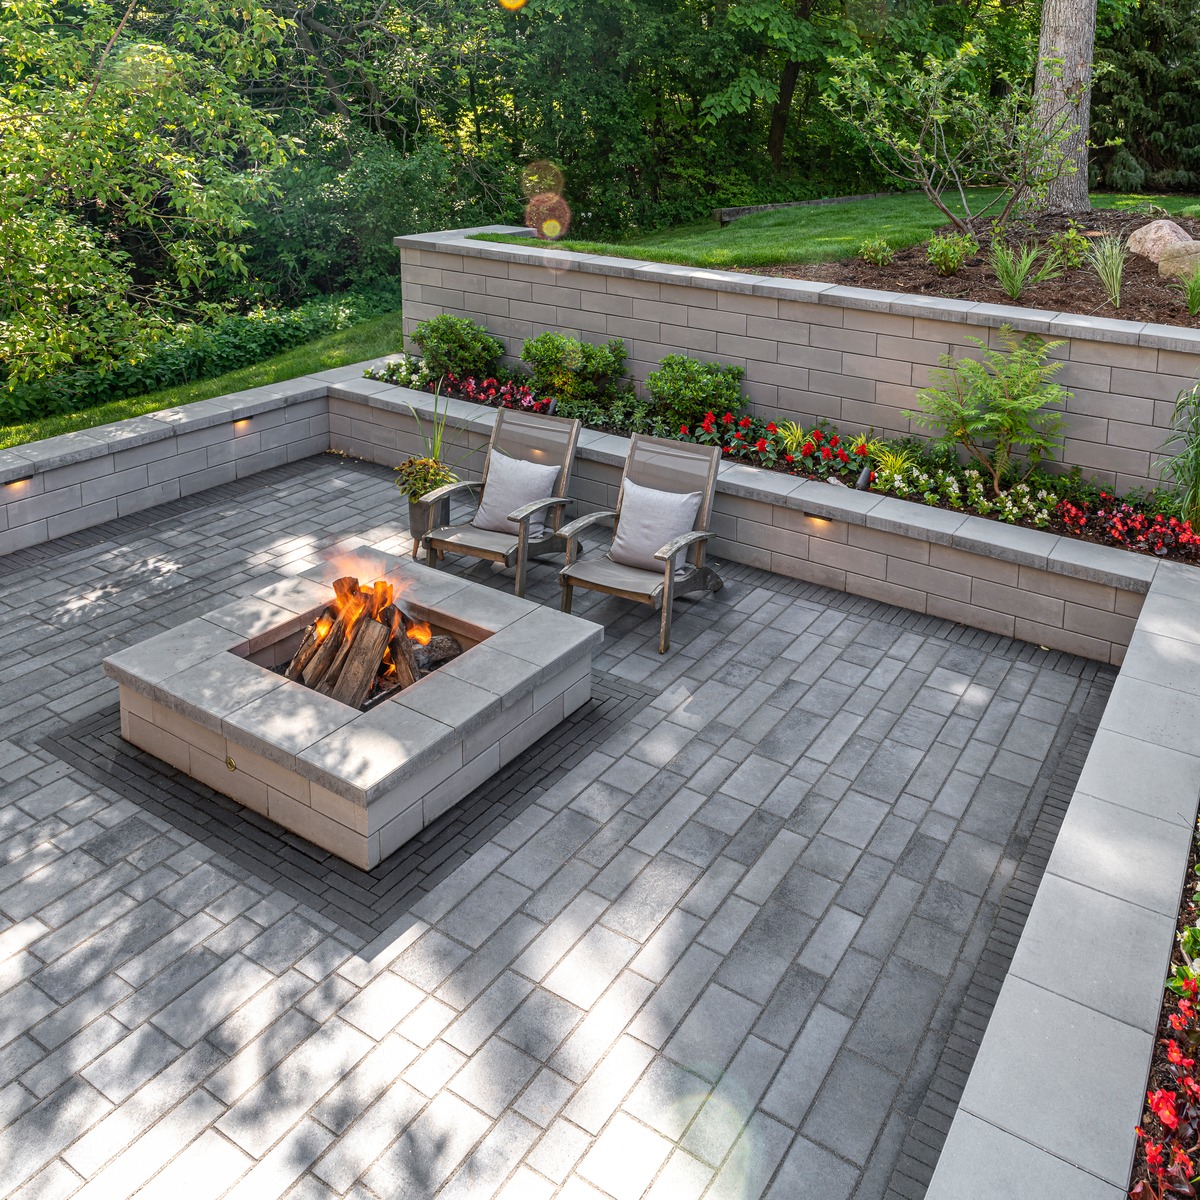 Sunken fire pit with retaining wall and softscaping